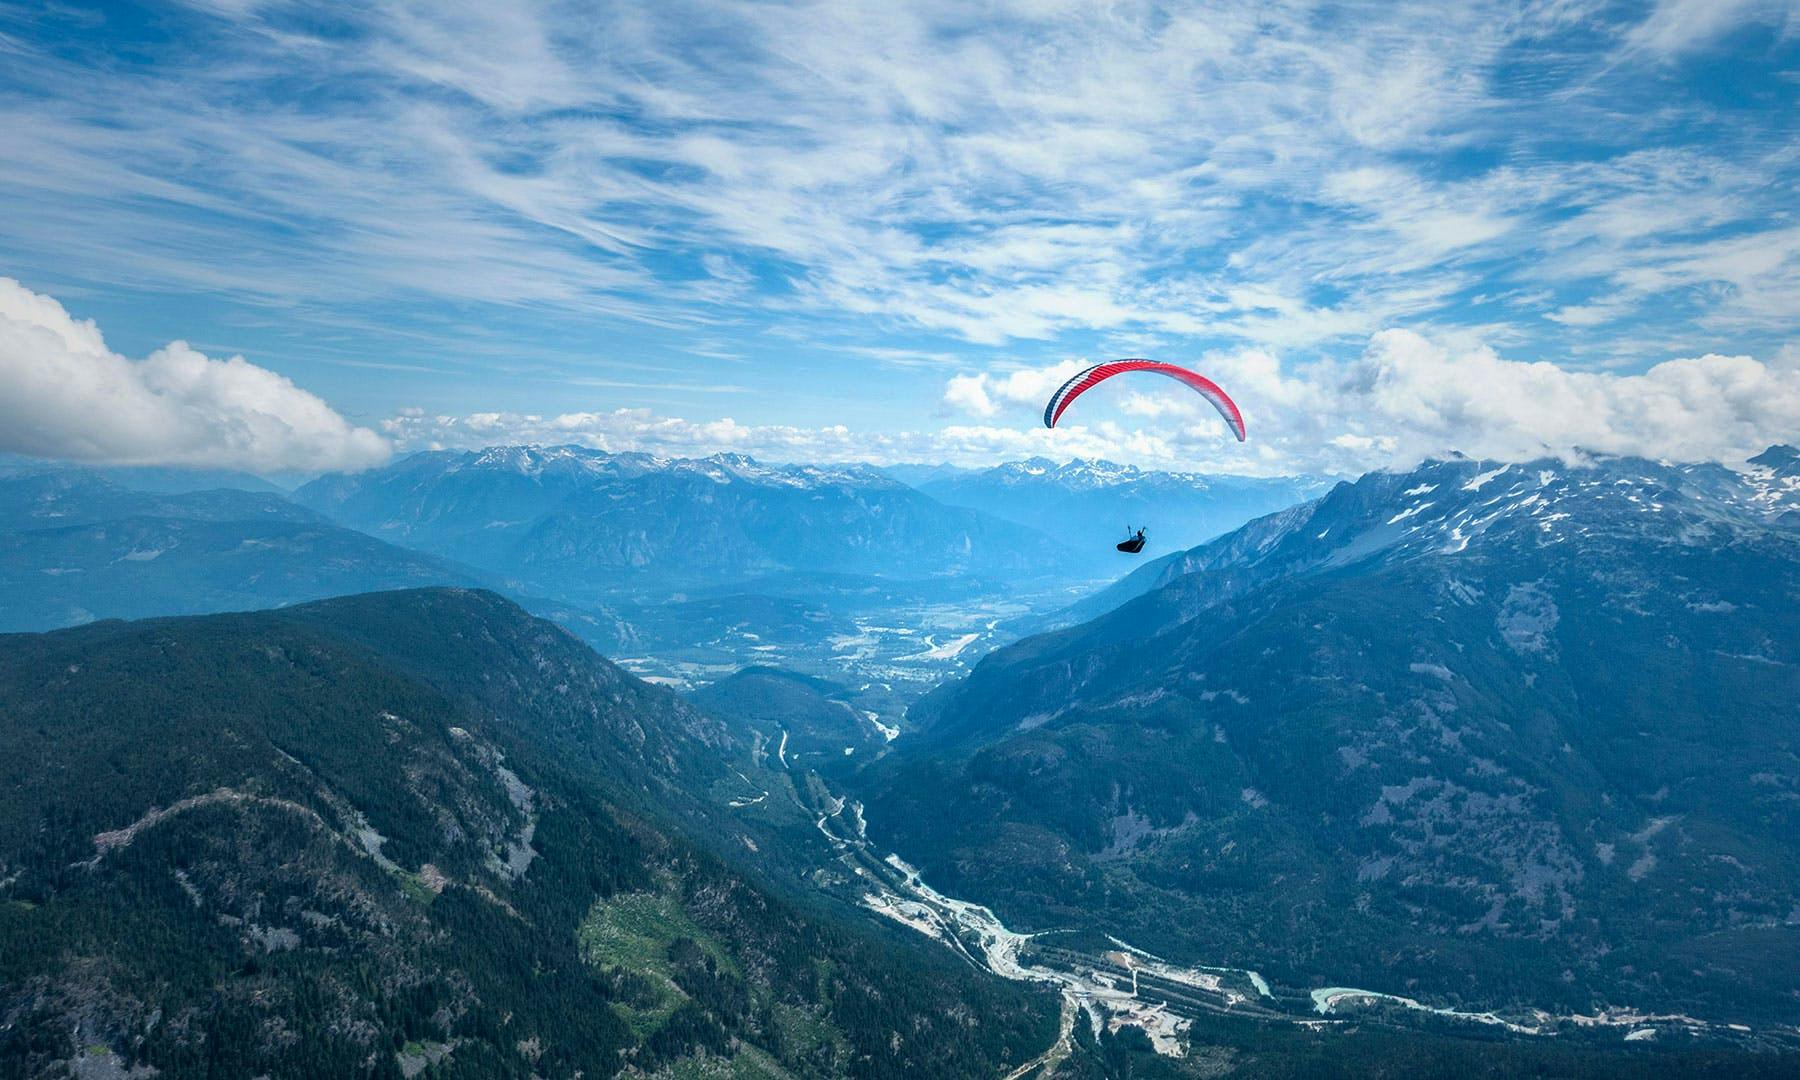 Paragliding in the Whistler area